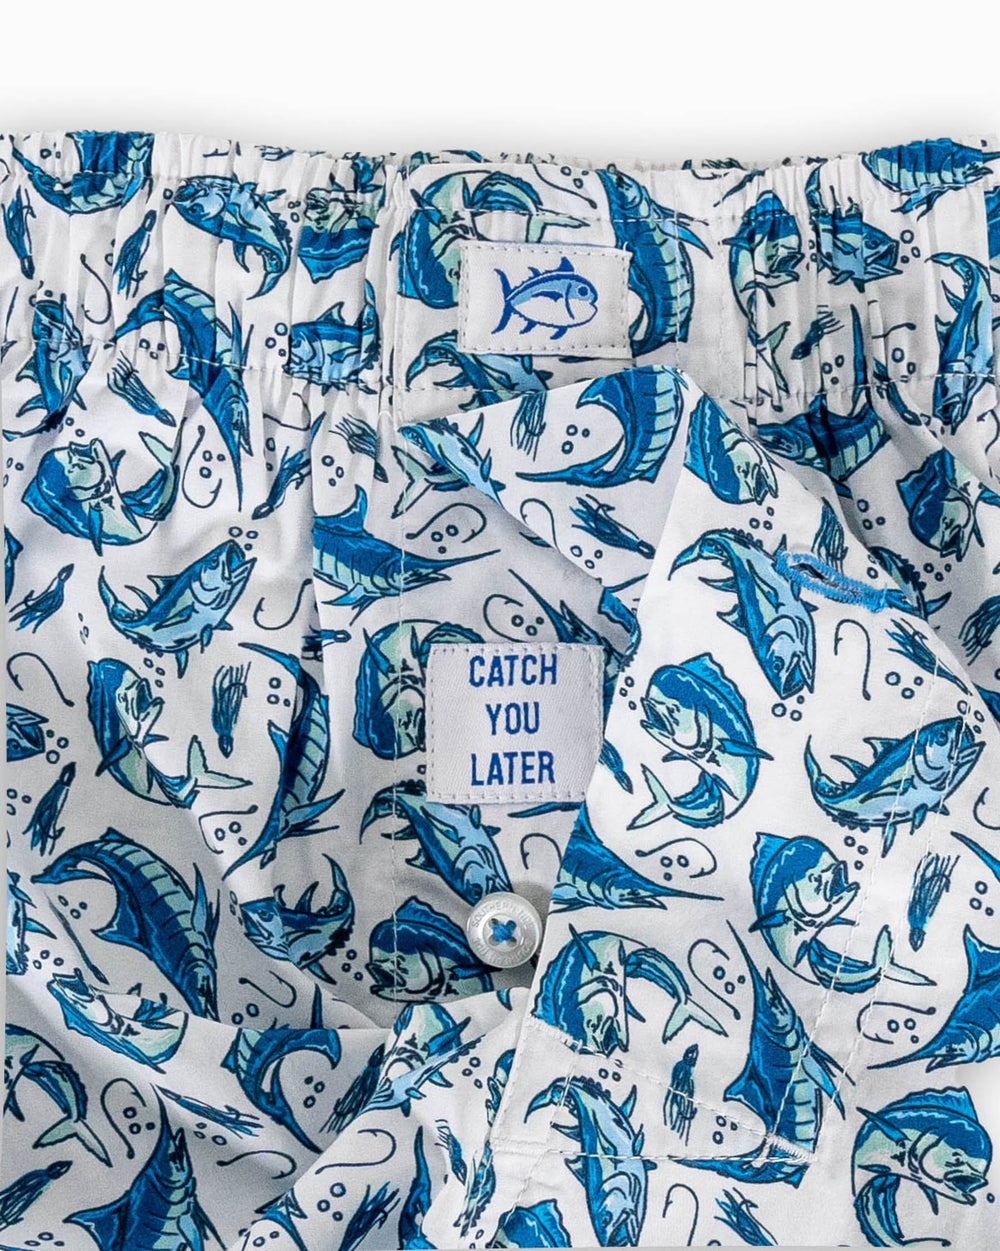 The detail view of the Southern Tide Catch You Later Boxer by Southern Tide - Classic White